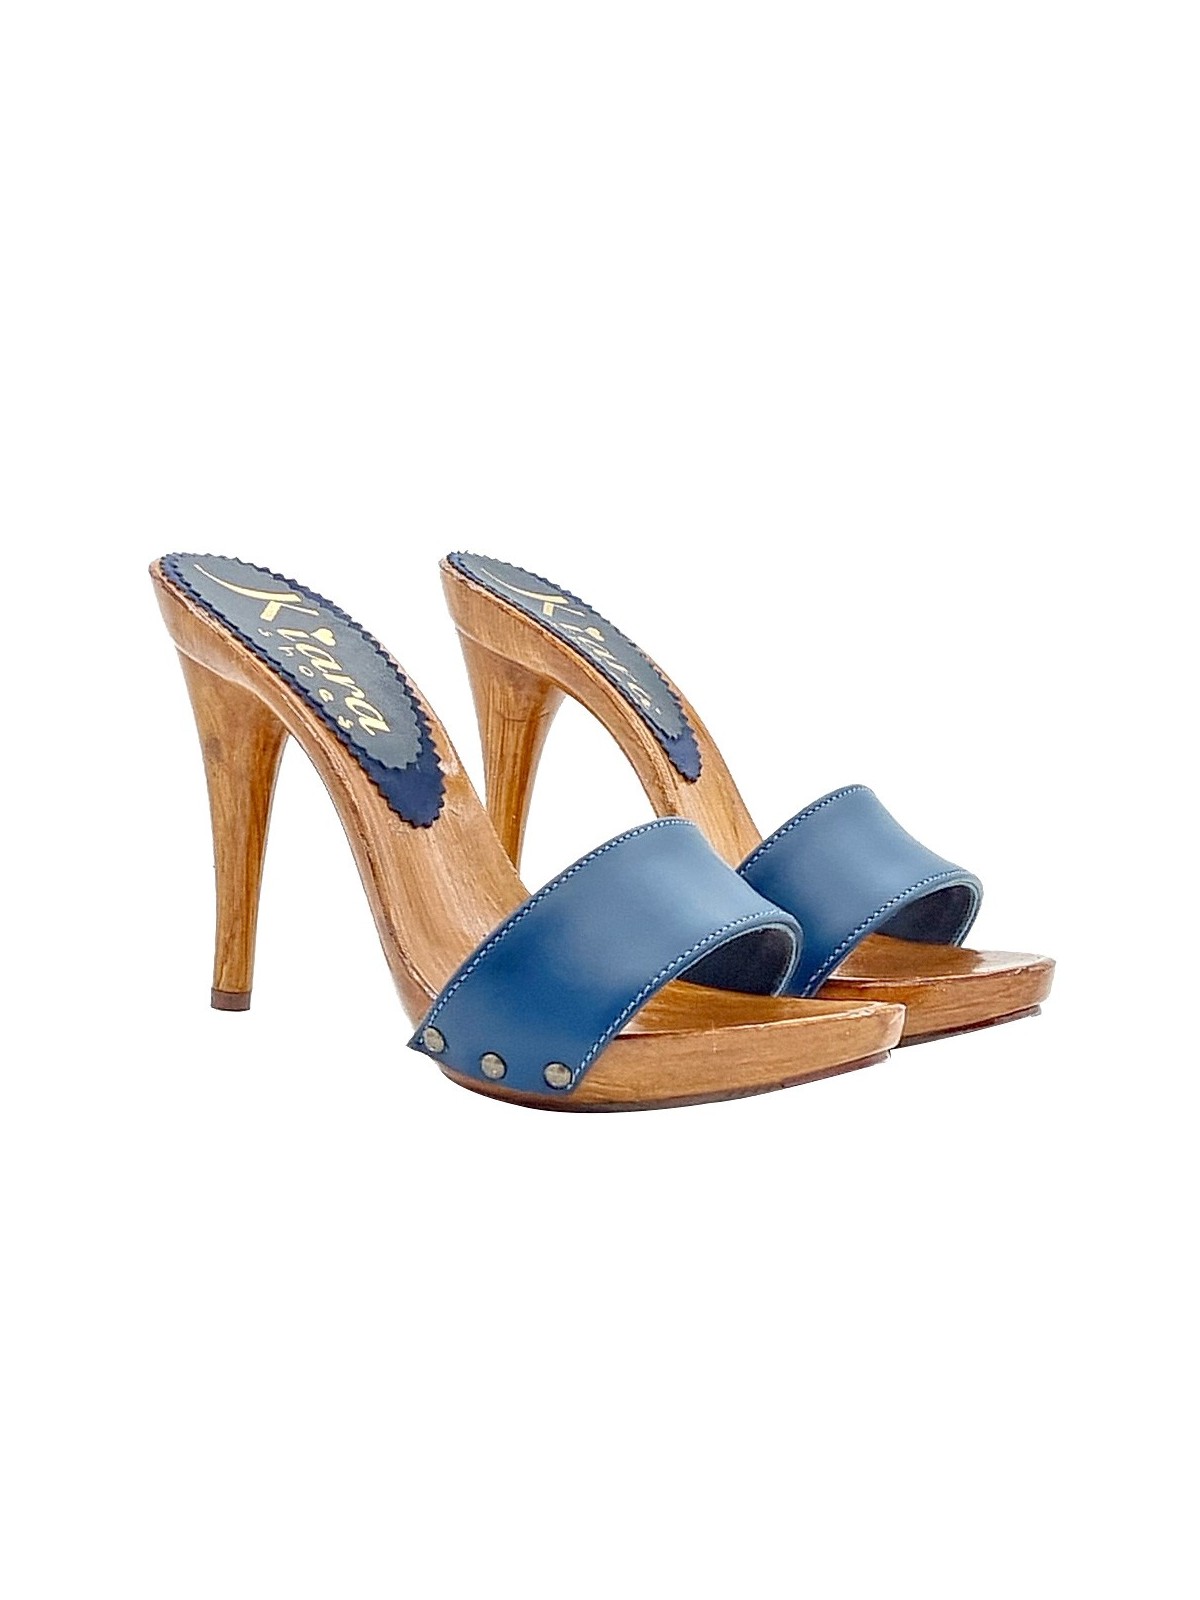 CLOGS IN BLUE LEATHER WITH STILETTO HEEL